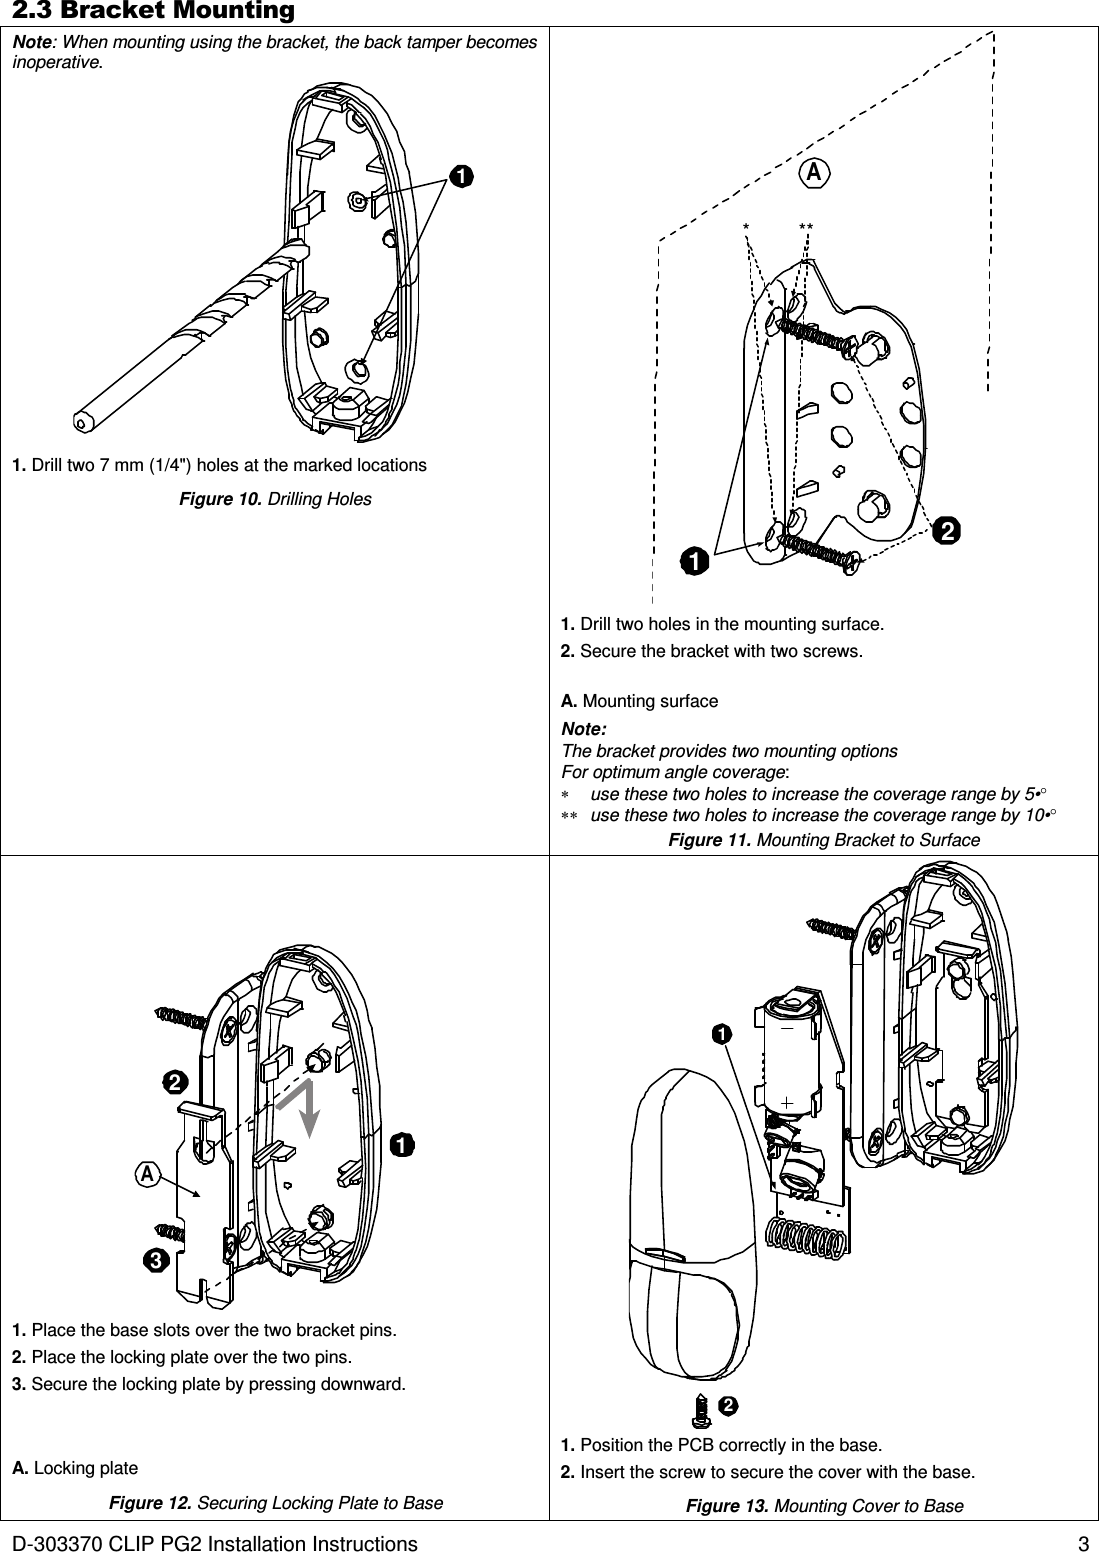 D-303370 CLIP PG2 Installation Instructions  3 2.3 Bracket Mounting Note: When mounting using the bracket, the back tamper becomes inoperative. 1 1. Drill two 7 mm (1/4&quot;) holes at the marked locations Figure 10. Drilling Holes 12* **A 1. Drill two holes in the mounting surface. 2. Secure the bracket with two screws. A. Mounting surface Note:  The bracket provides two mounting options  For optimum angle coverage: ∗  use these two holes to increase the coverage range by 5•° ∗∗  use these two holes to increase the coverage range by 10•° Figure 11. Mounting Bracket to Surface 132A  1. Place the base slots over the two bracket pins. 2. Place the locking plate over the two pins. 3. Secure the locking plate by pressing downward. A. Locking plate Figure 12. Securing Locking Plate to Base   12 1. Position the PCB correctly in the base. 2. Insert the screw to secure the cover with the base. Figure 13. Mounting Cover to Base  